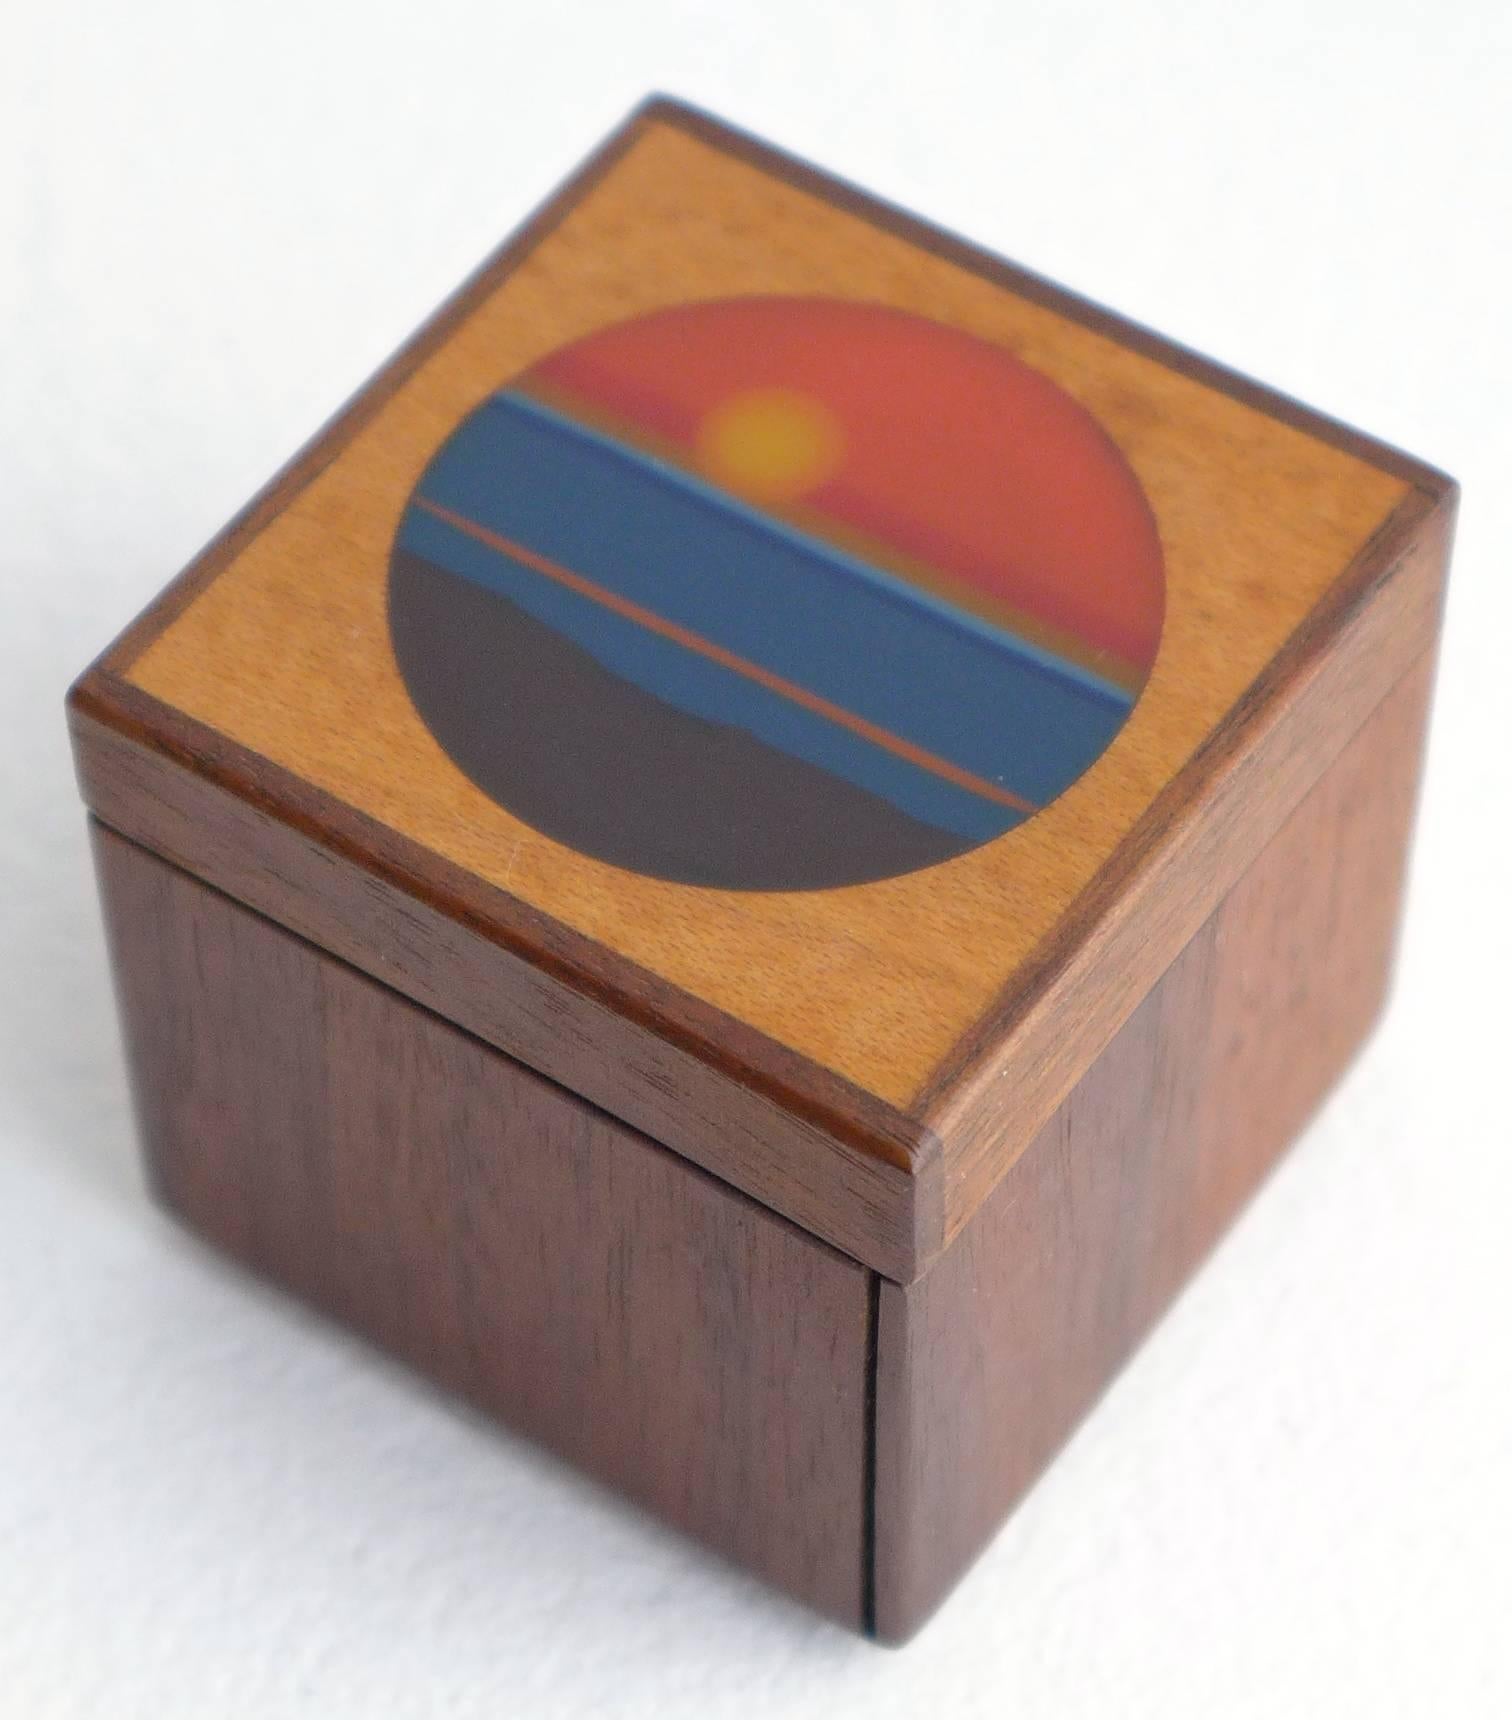 Small but vivid and masterful work by San Francisco Bay artisan Robert McKeown (1931-1989). A graduate of the California College of Arts and Crafts, McKeown was a color theorist and woodworker who won acclaim for his innovative resin inlays on a